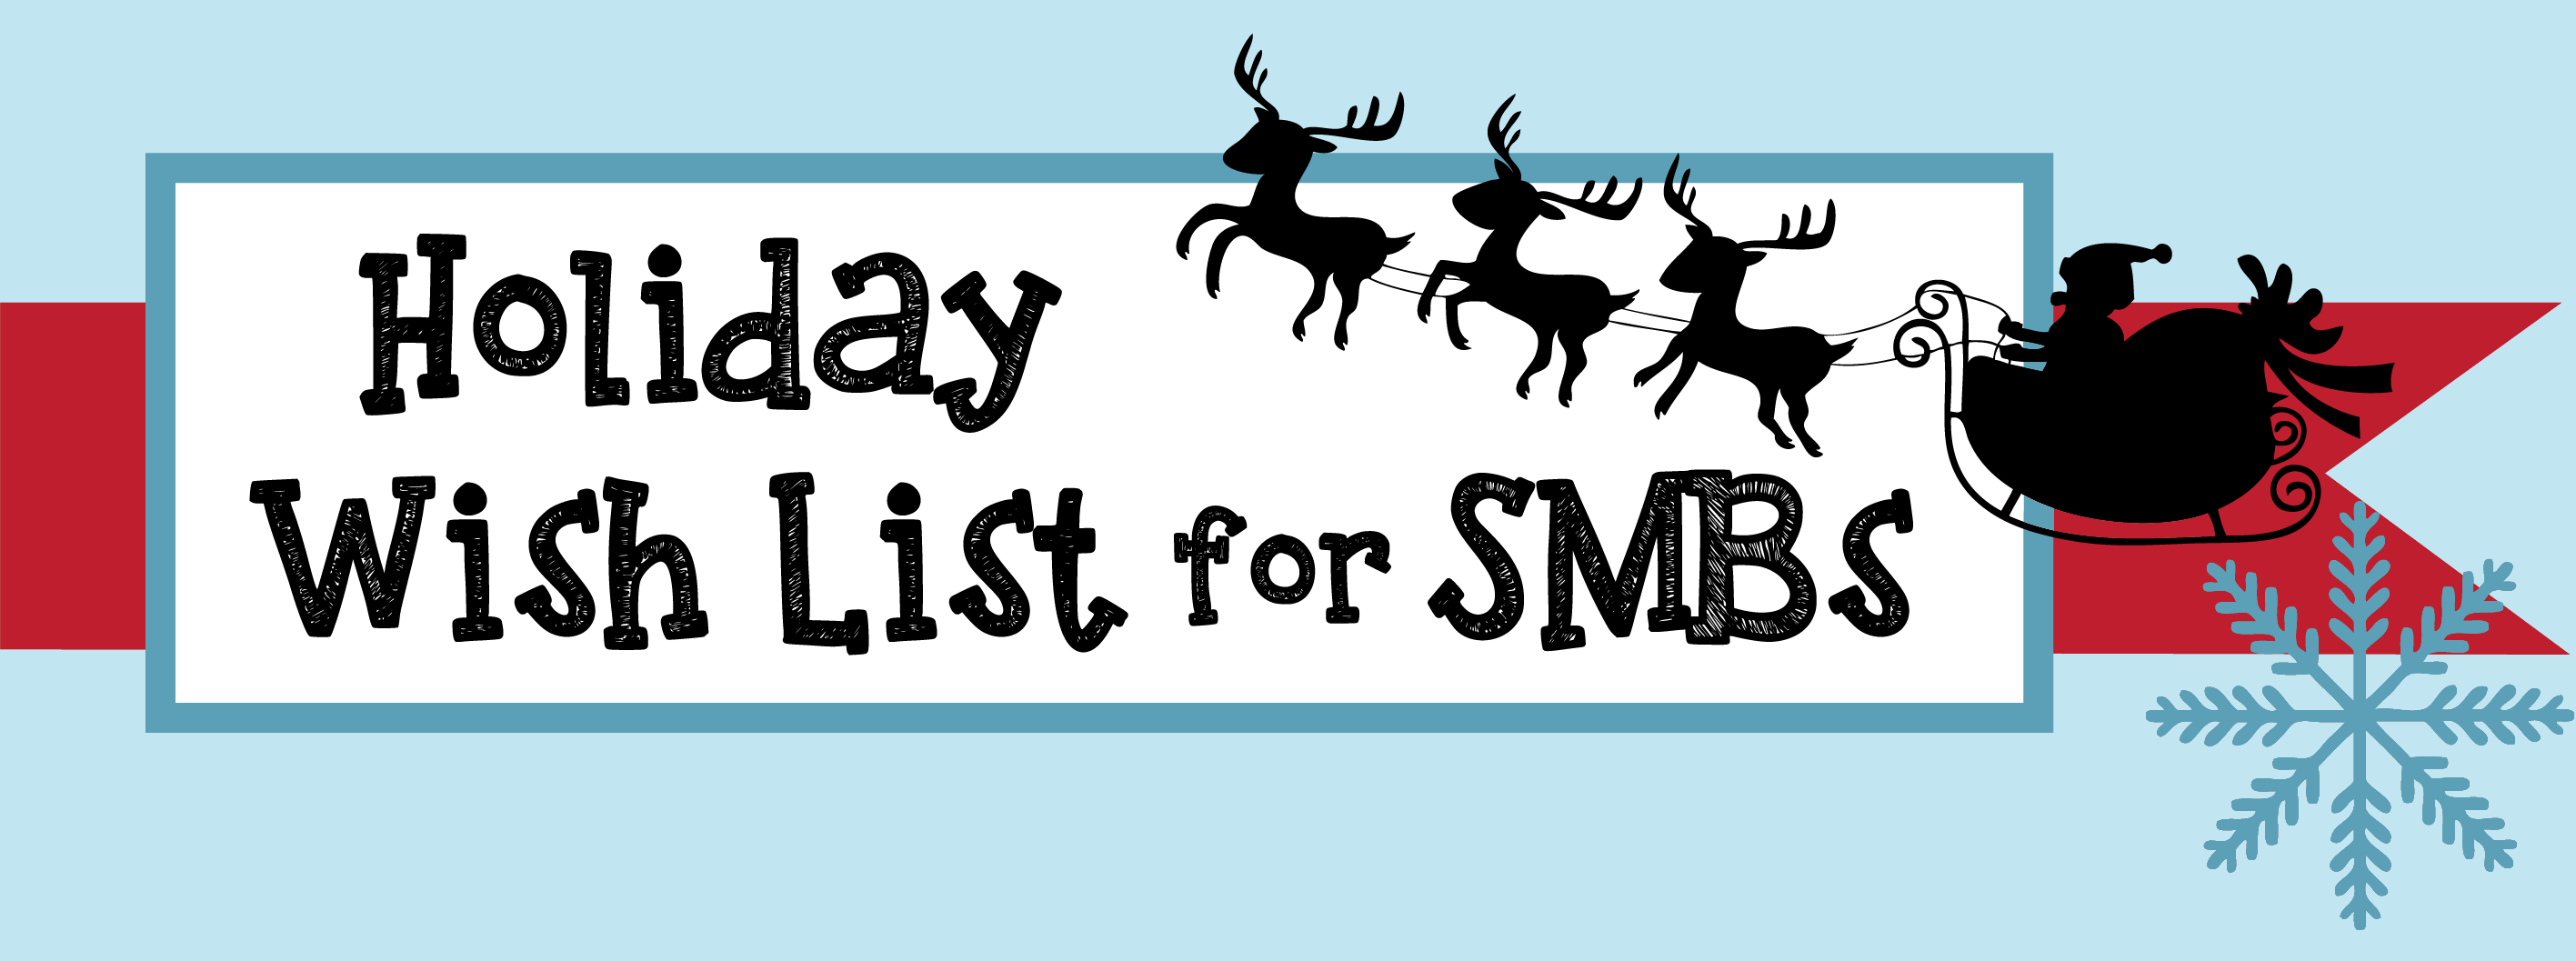 Holiday Wish List For SMBs